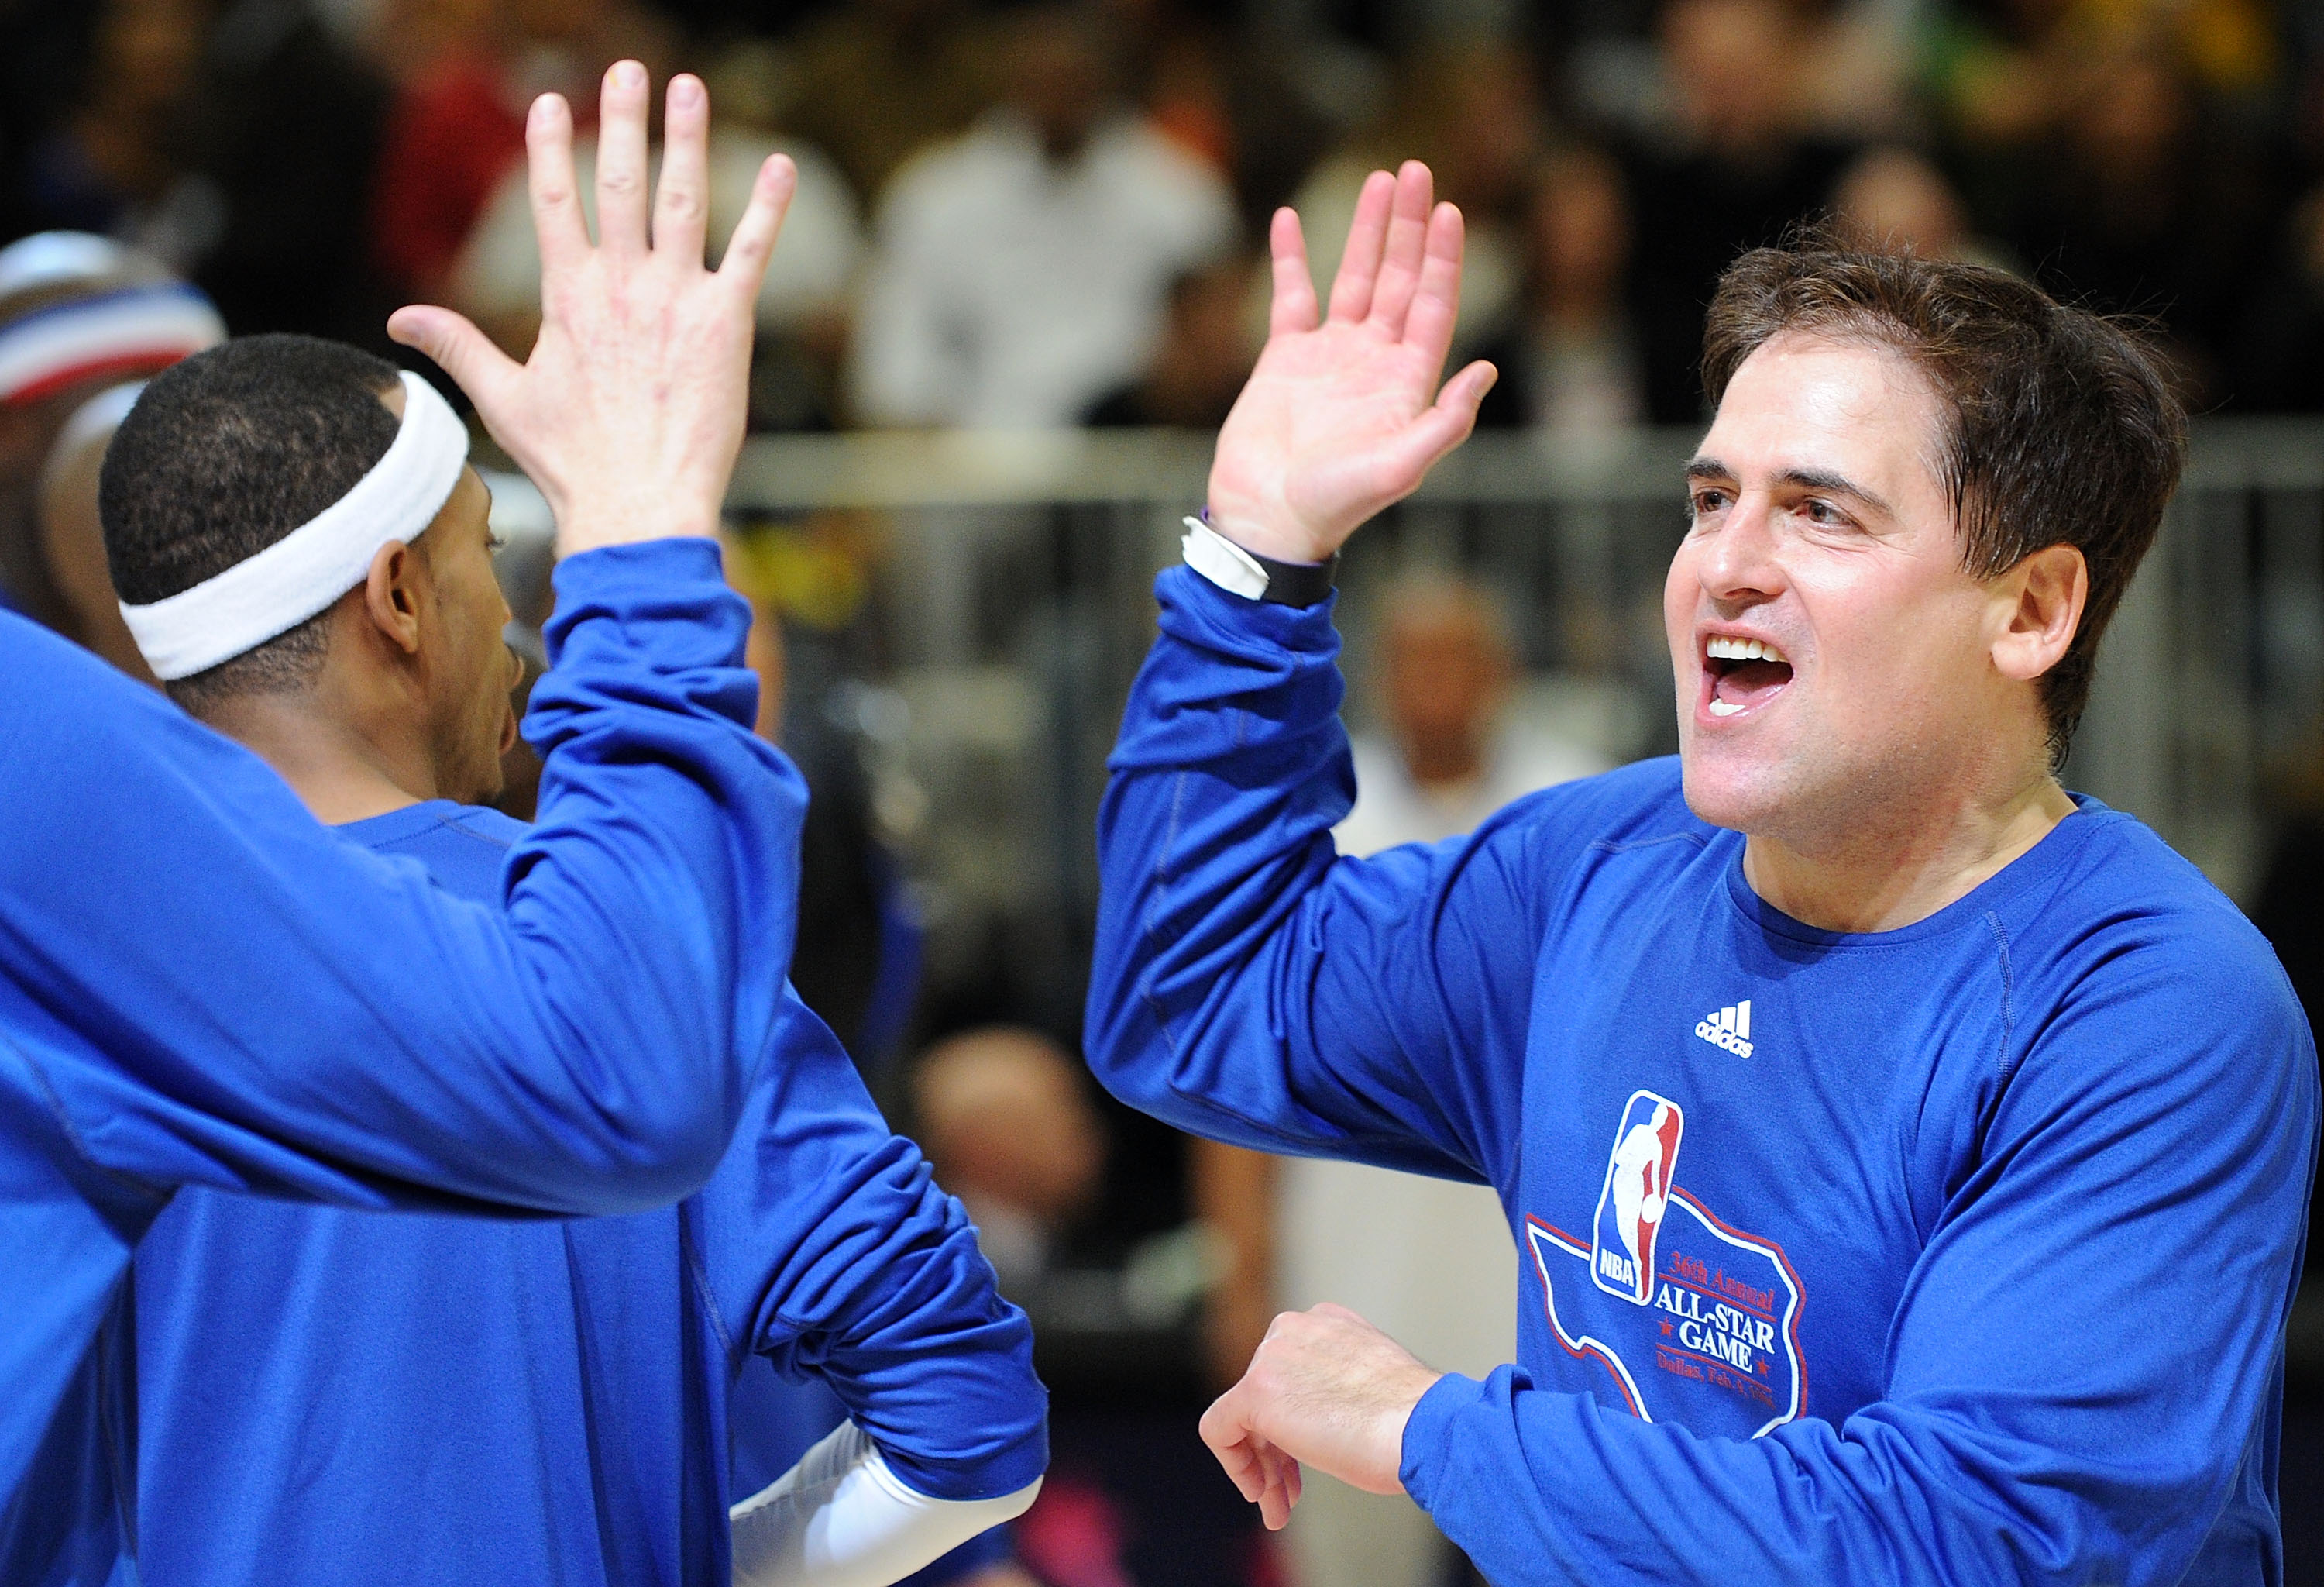 DALLAS - FEBRUARY 12:  Dallas Mavericks owner Mark Cuban during the NBA All-Star celebrity game presented by Final Fantasy XIII held at the Dallas Convention Center on February 12, 2010 in Dallas, Texas.  (Photo by Jason Merritt/Getty Images)